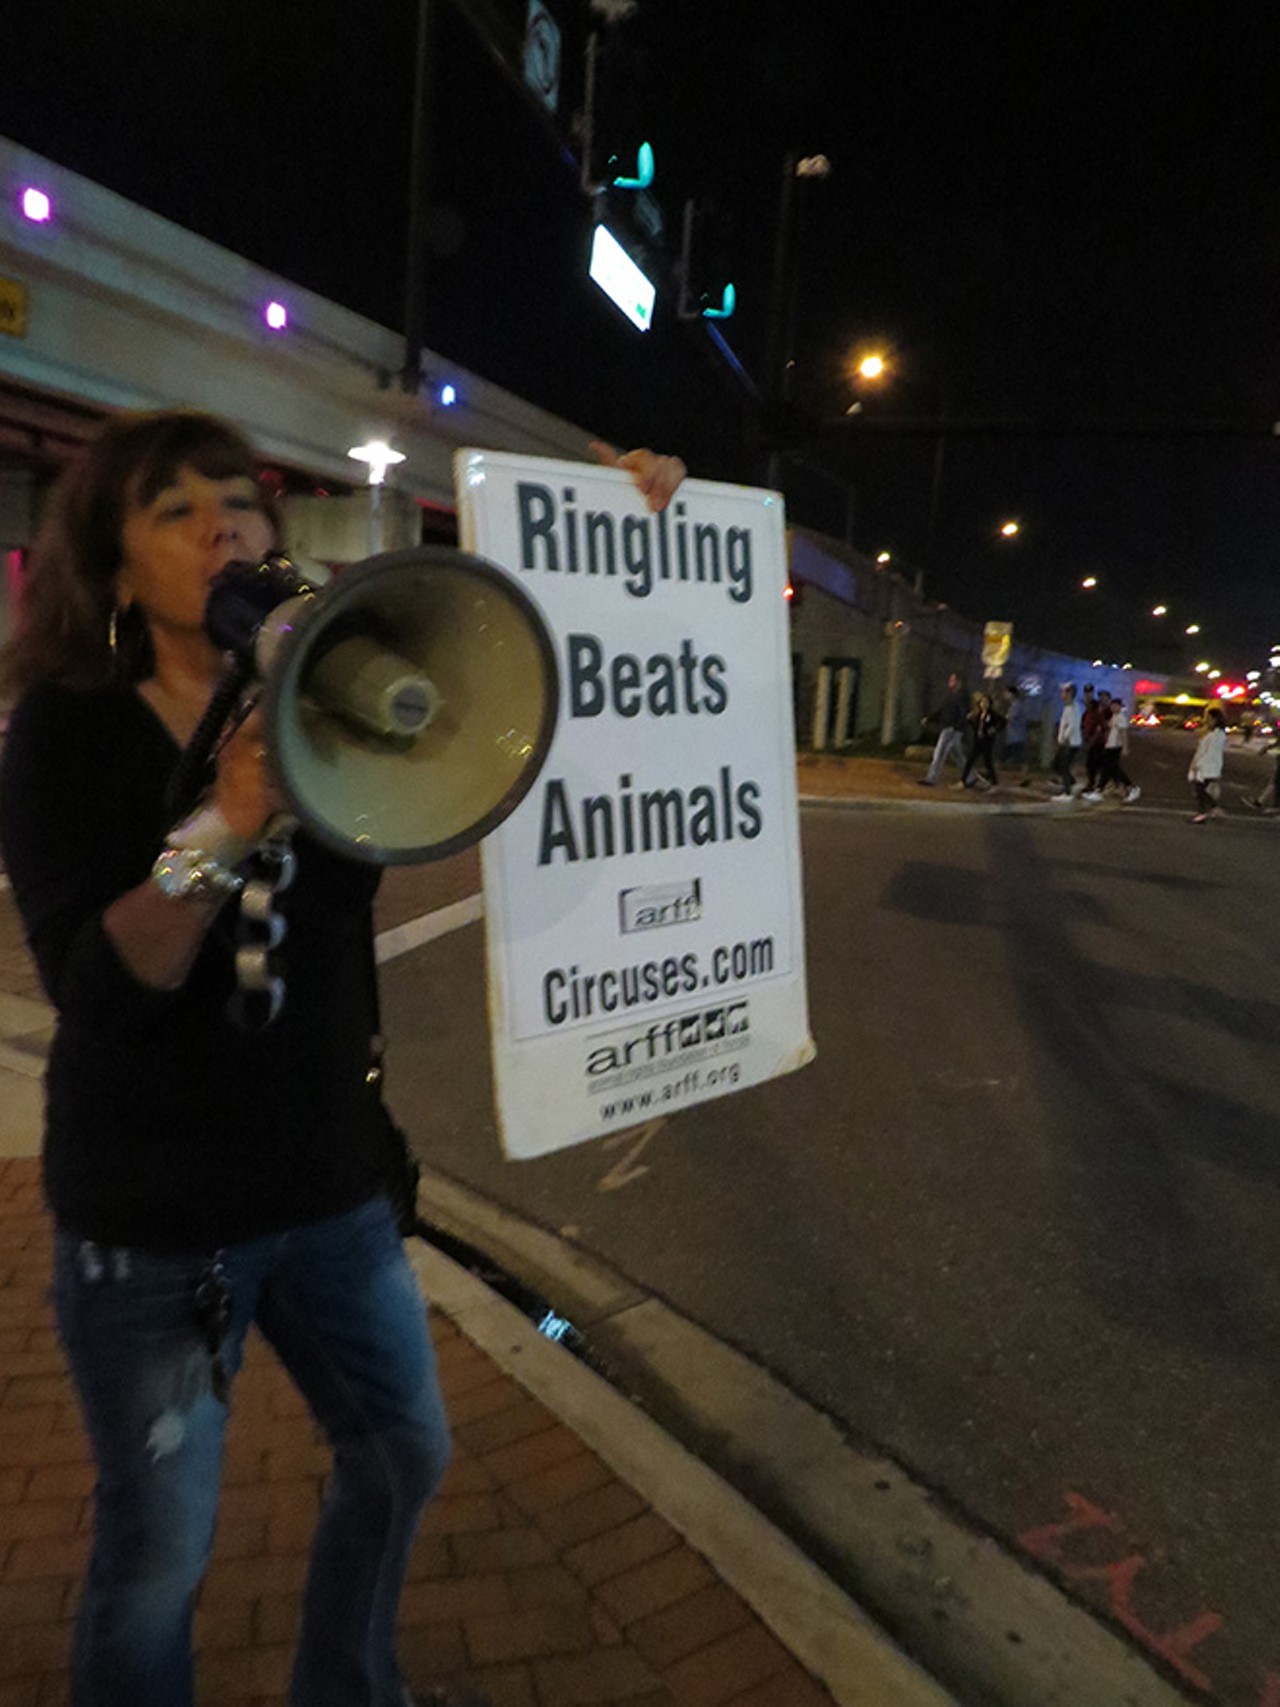 40 striking photos of Animal Rights Foundation of Florida's Ringling Brothers protest